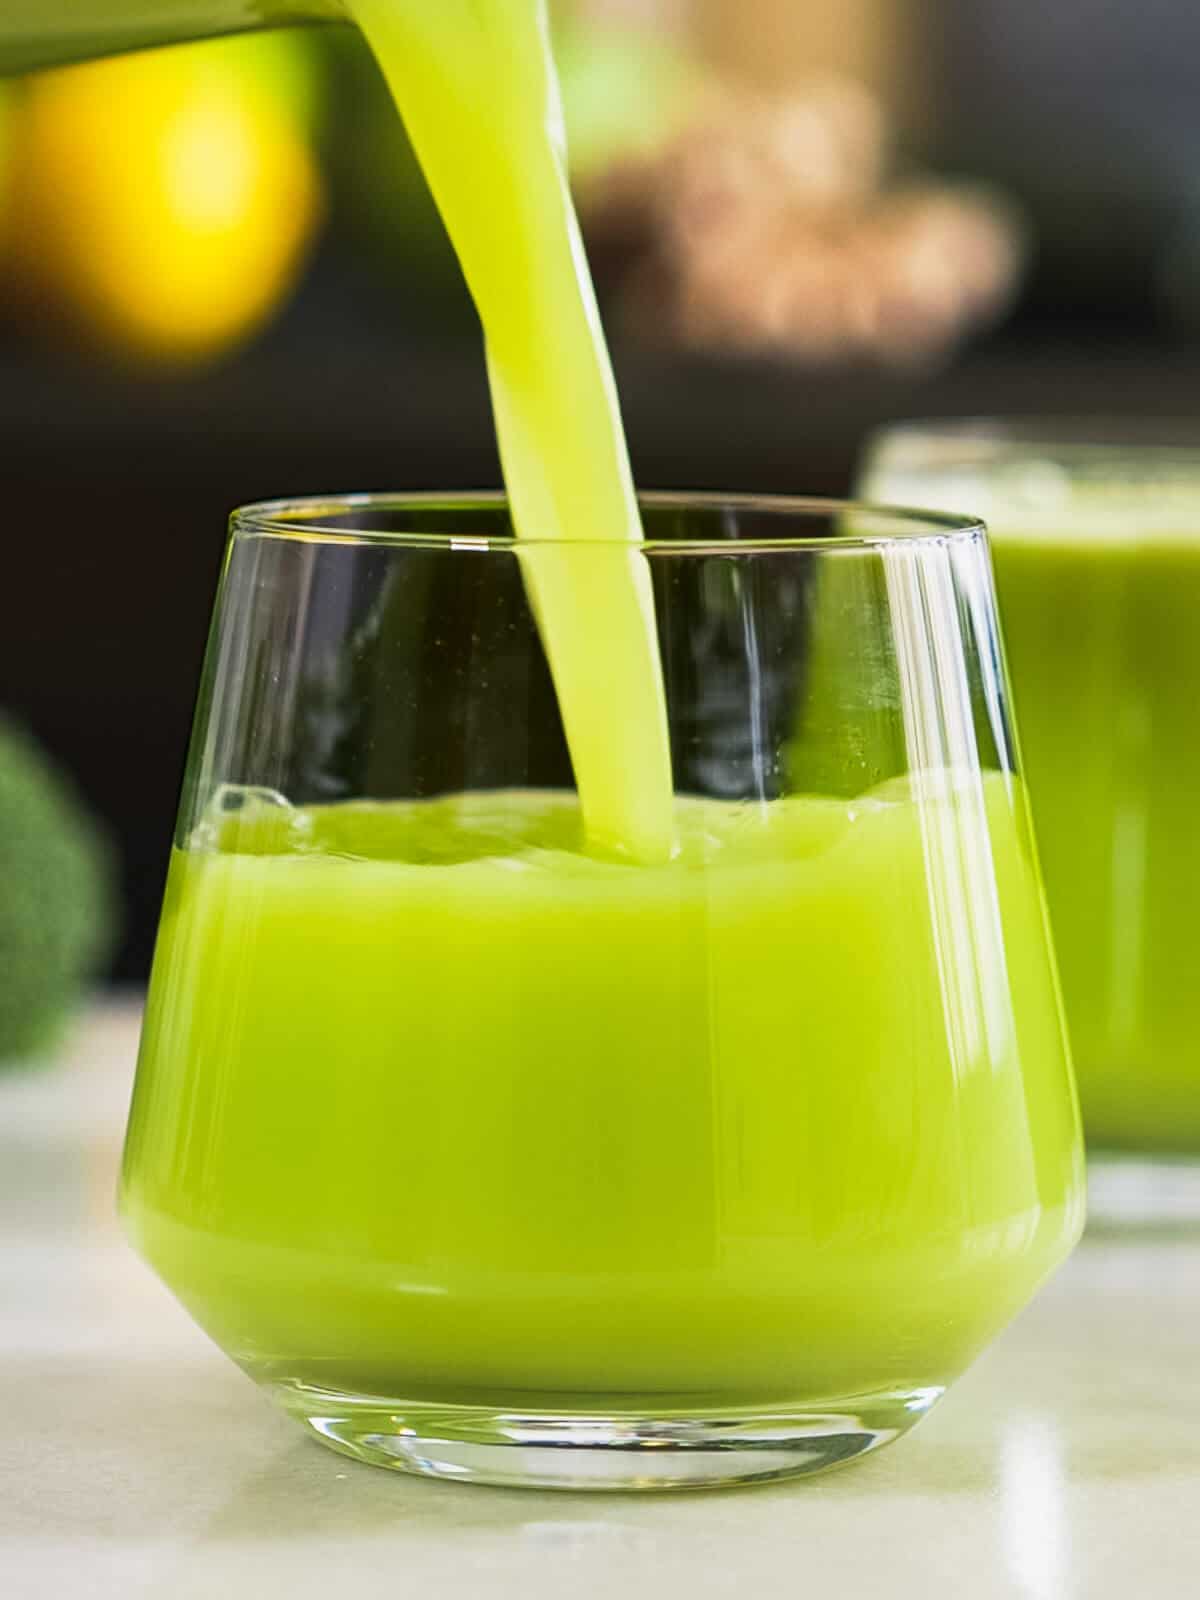 belly fat burning juices for weight loss.